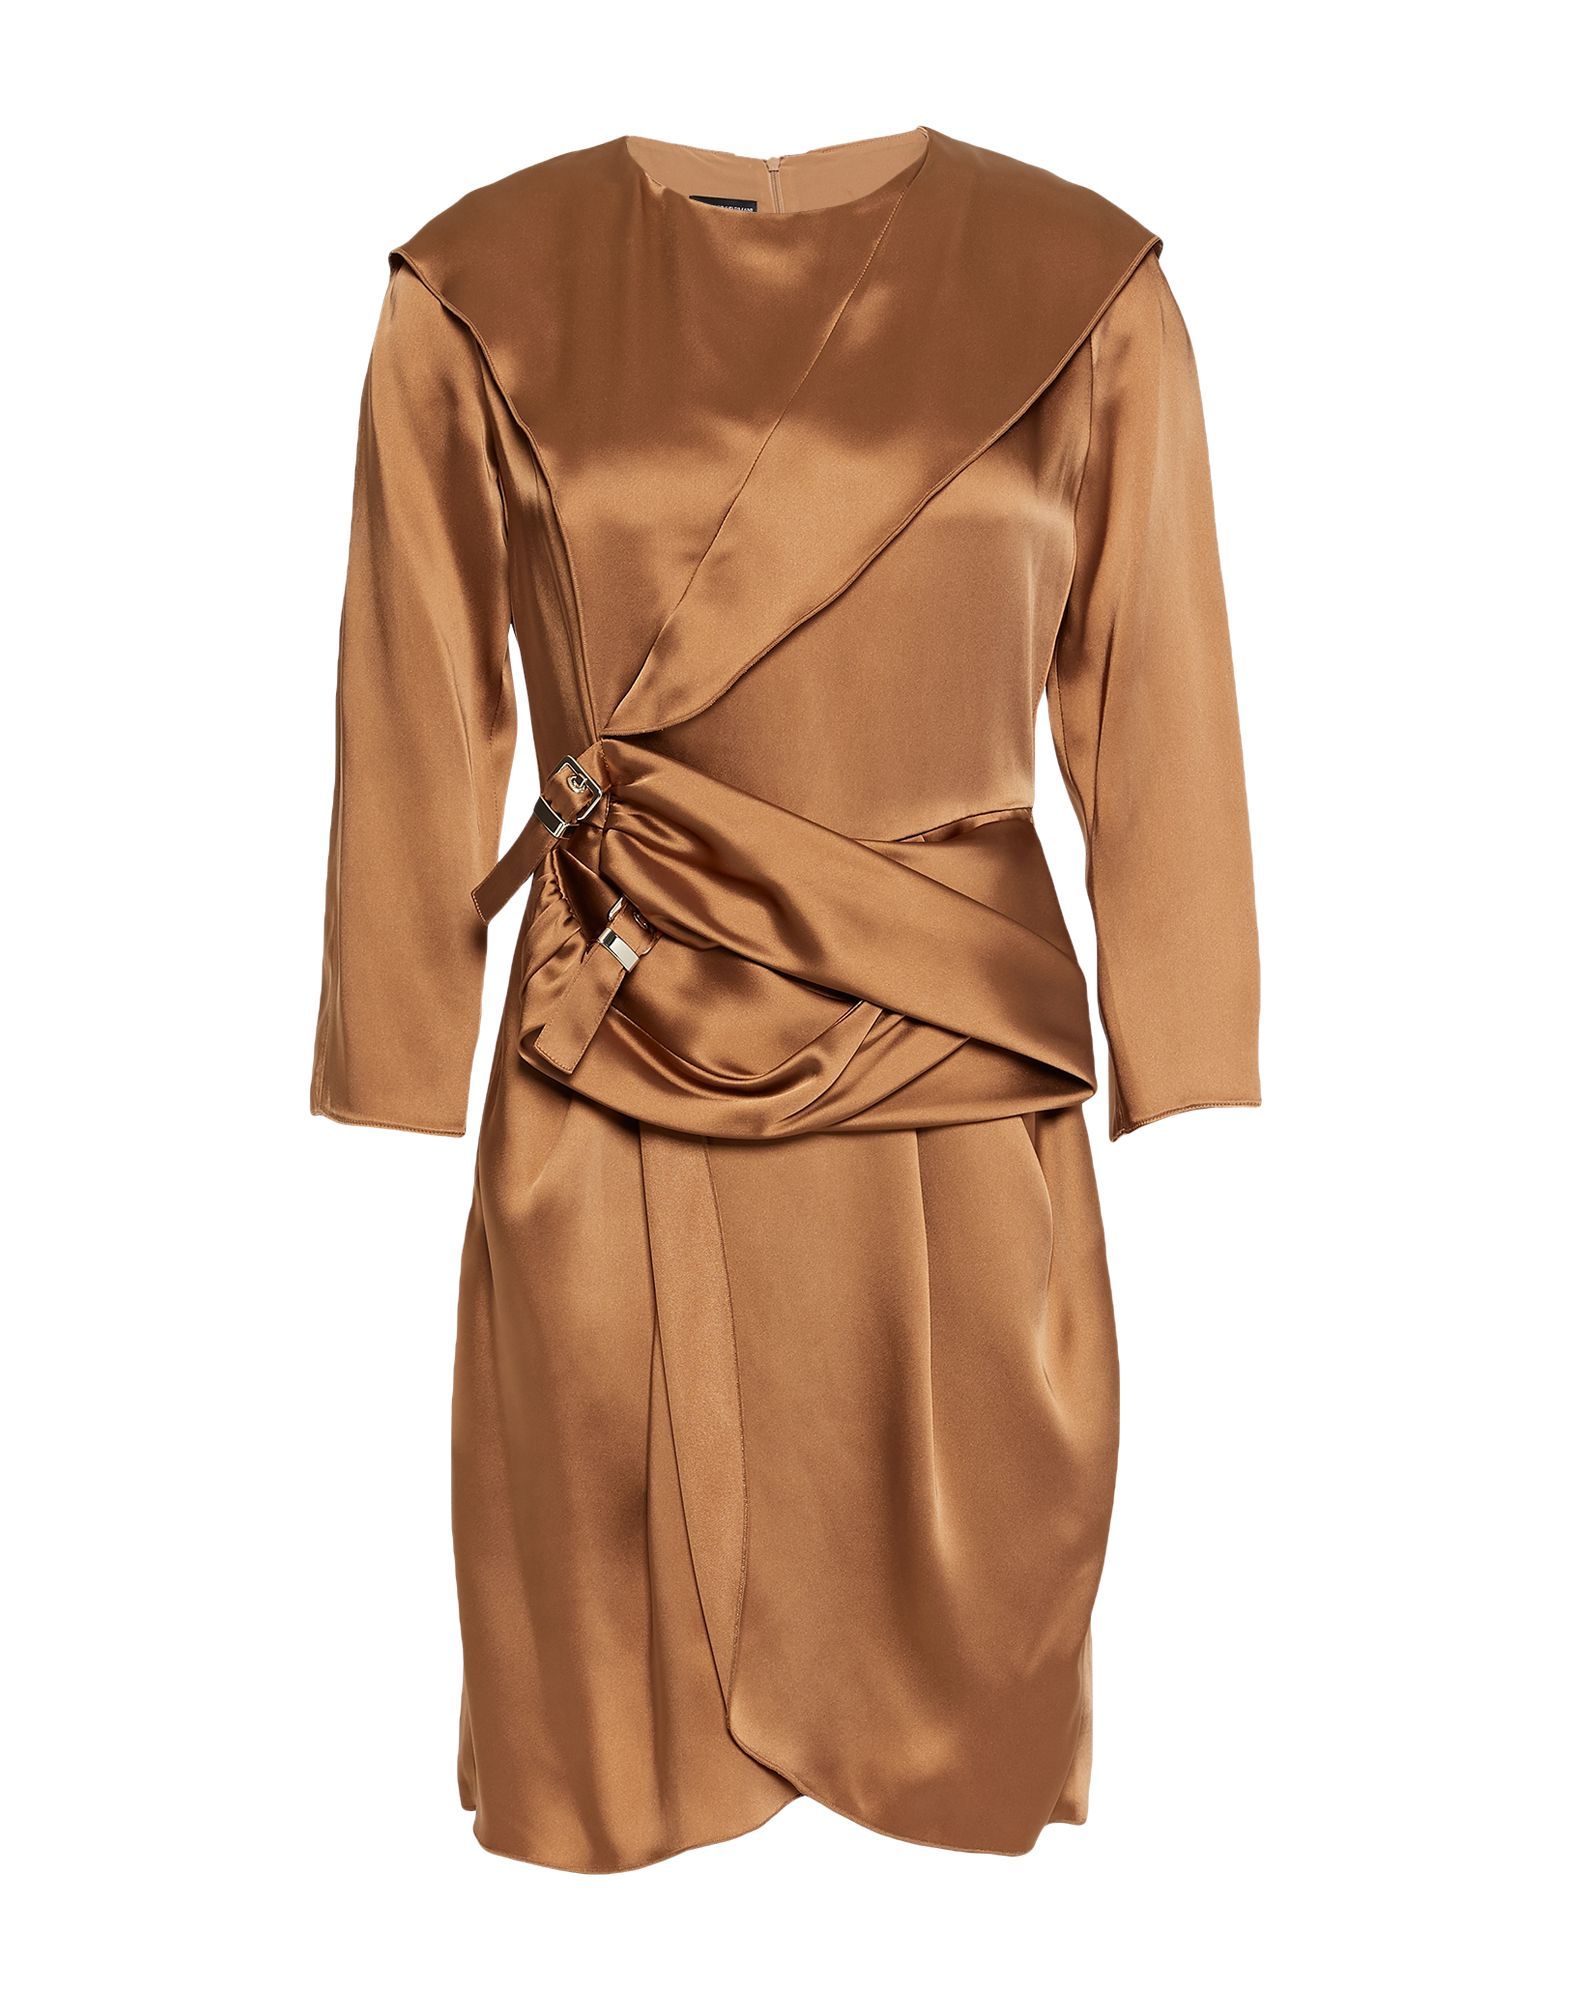 satin, solid colour, round collar, long sleeves, unlined